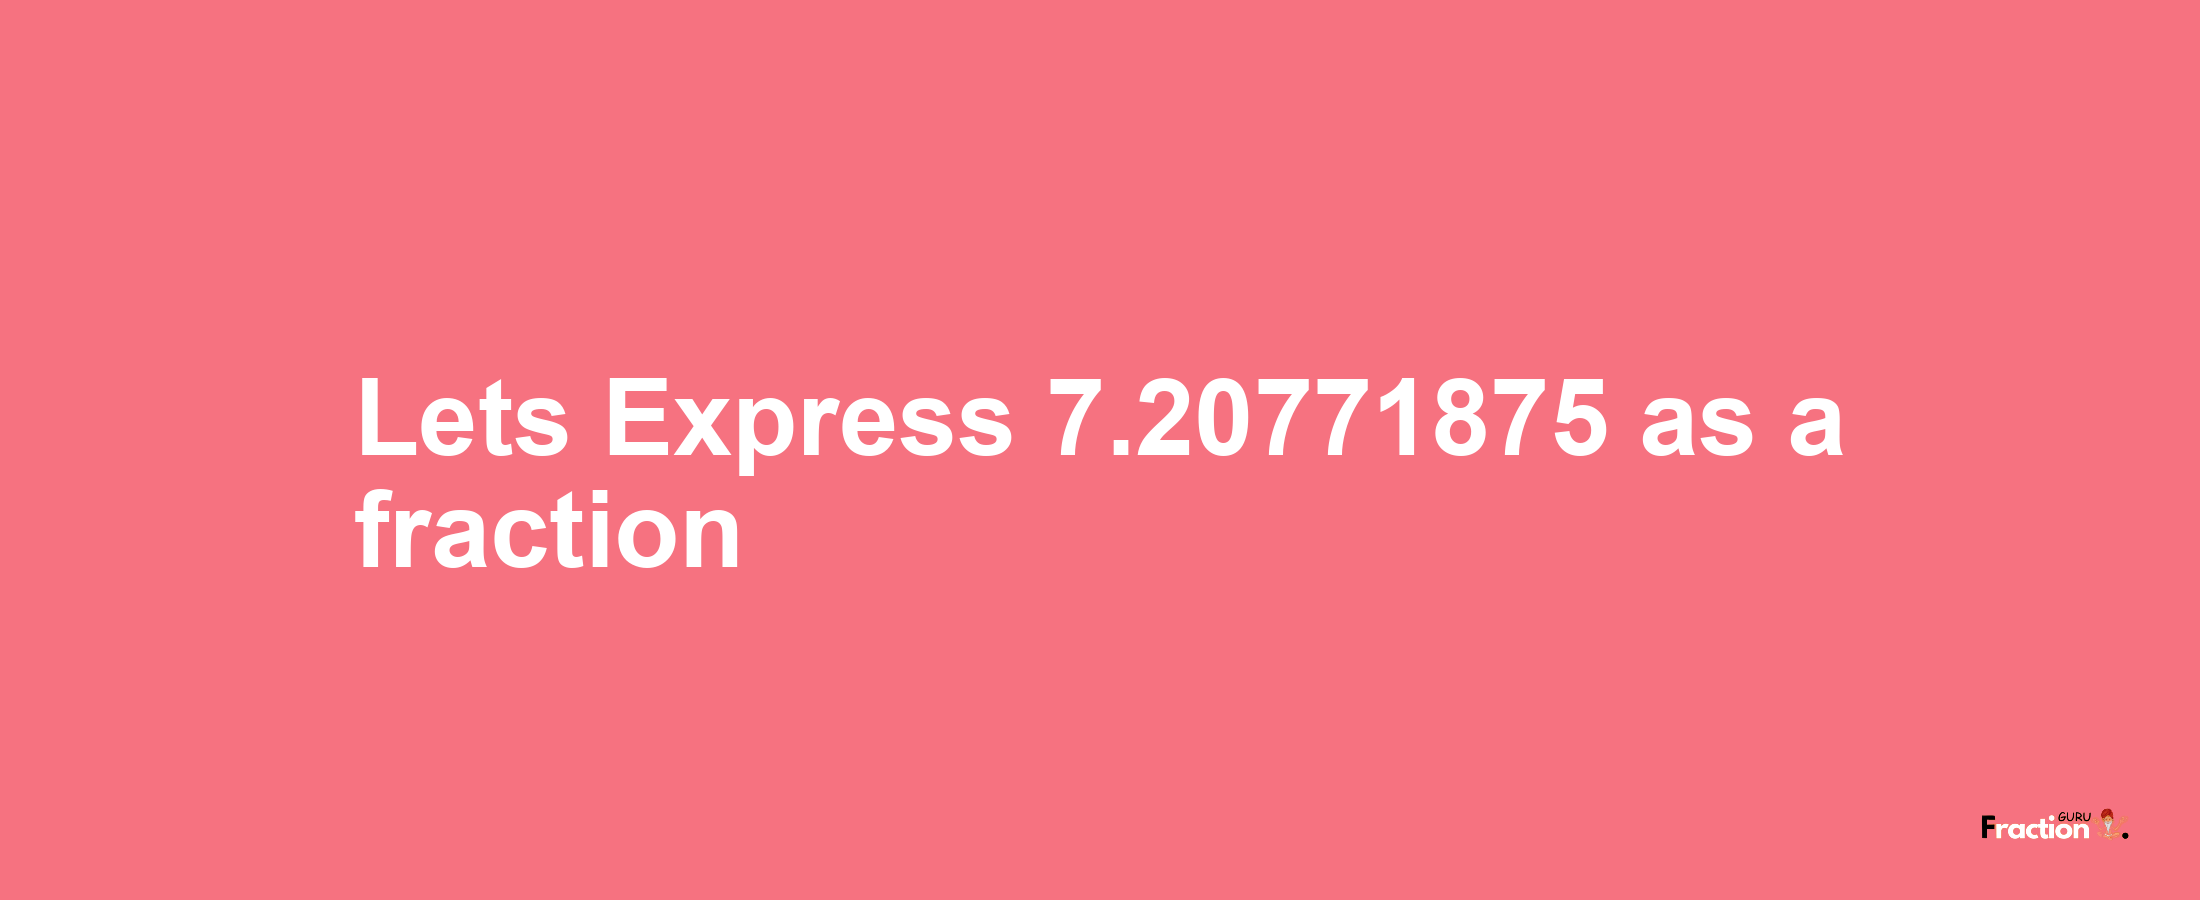 Lets Express 7.20771875 as afraction